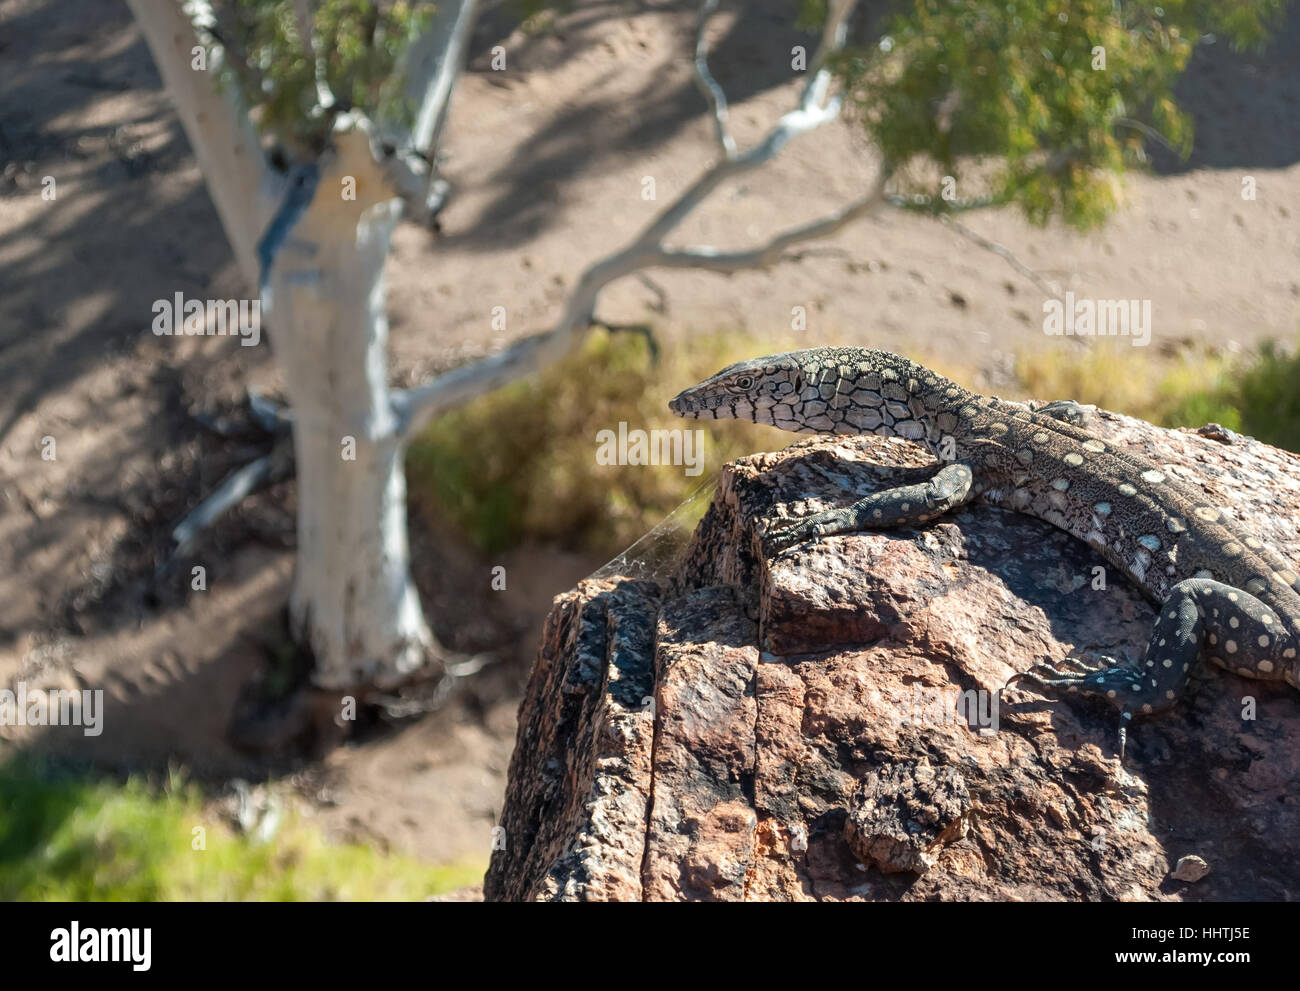 Australian lizard standing on a rock in the outback Stock Photo